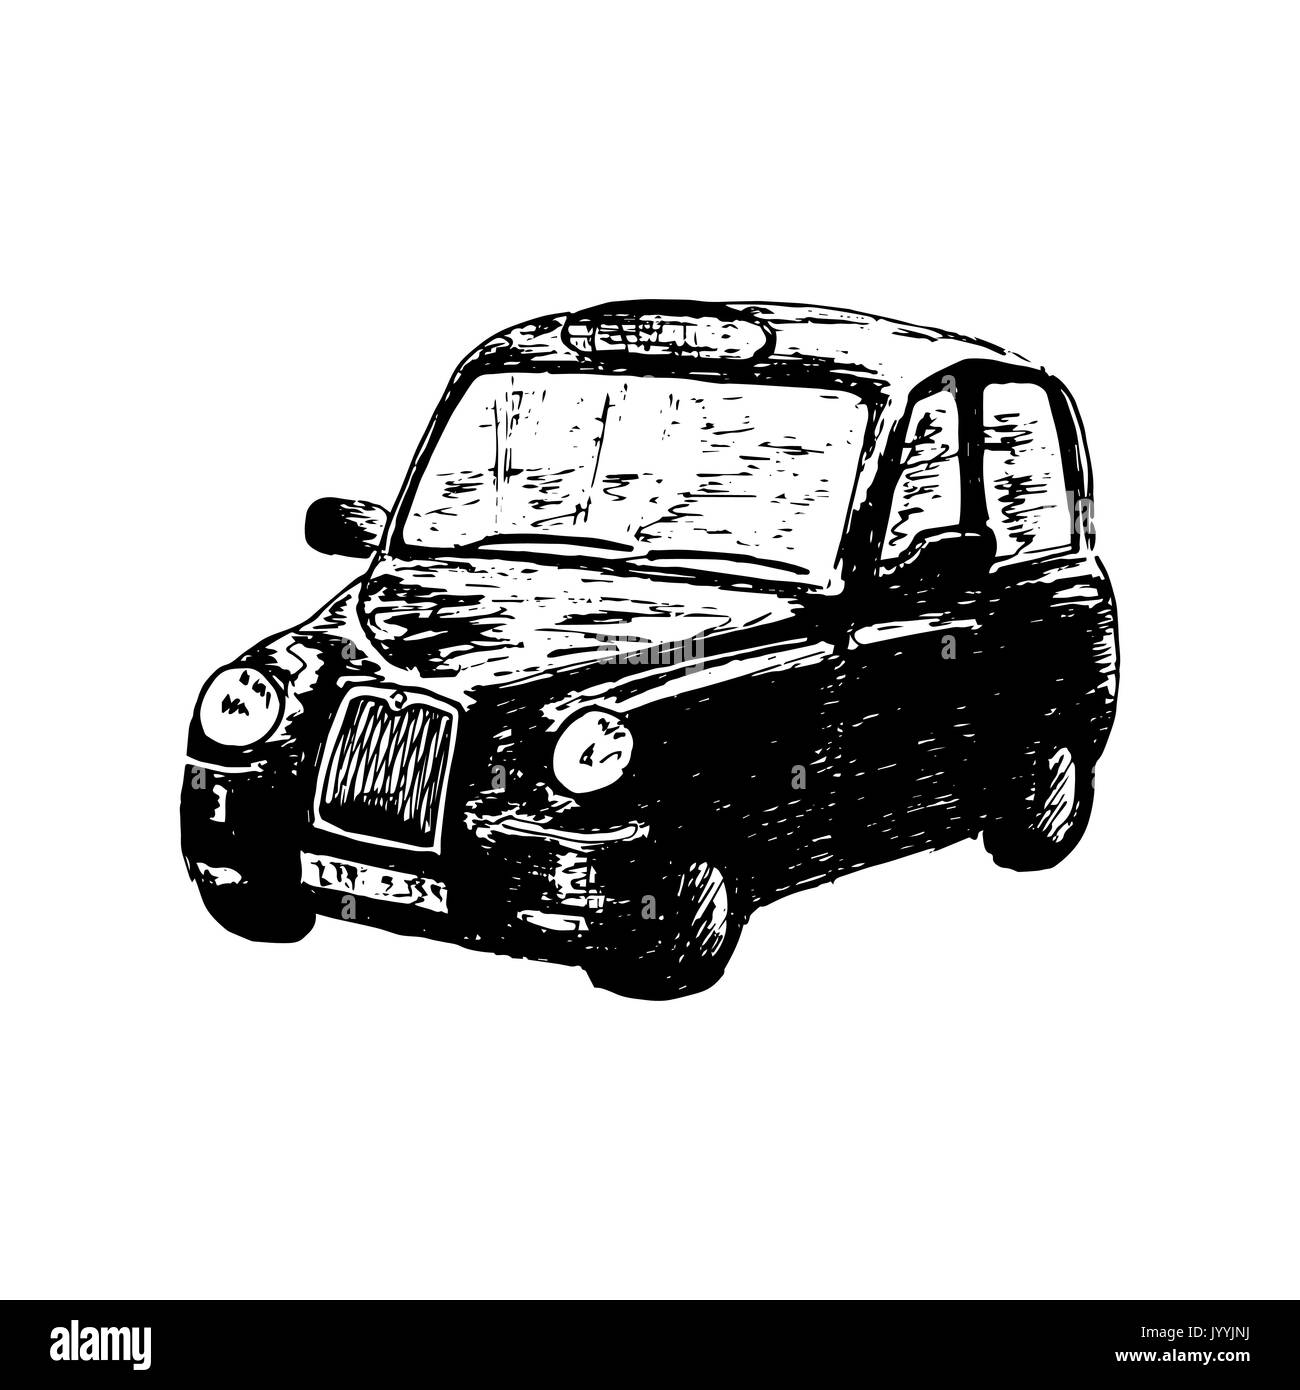 London classic black taxi cab, isolated, drawn vector sketch illustration. side view. Retro hackney carriage Stock Vector